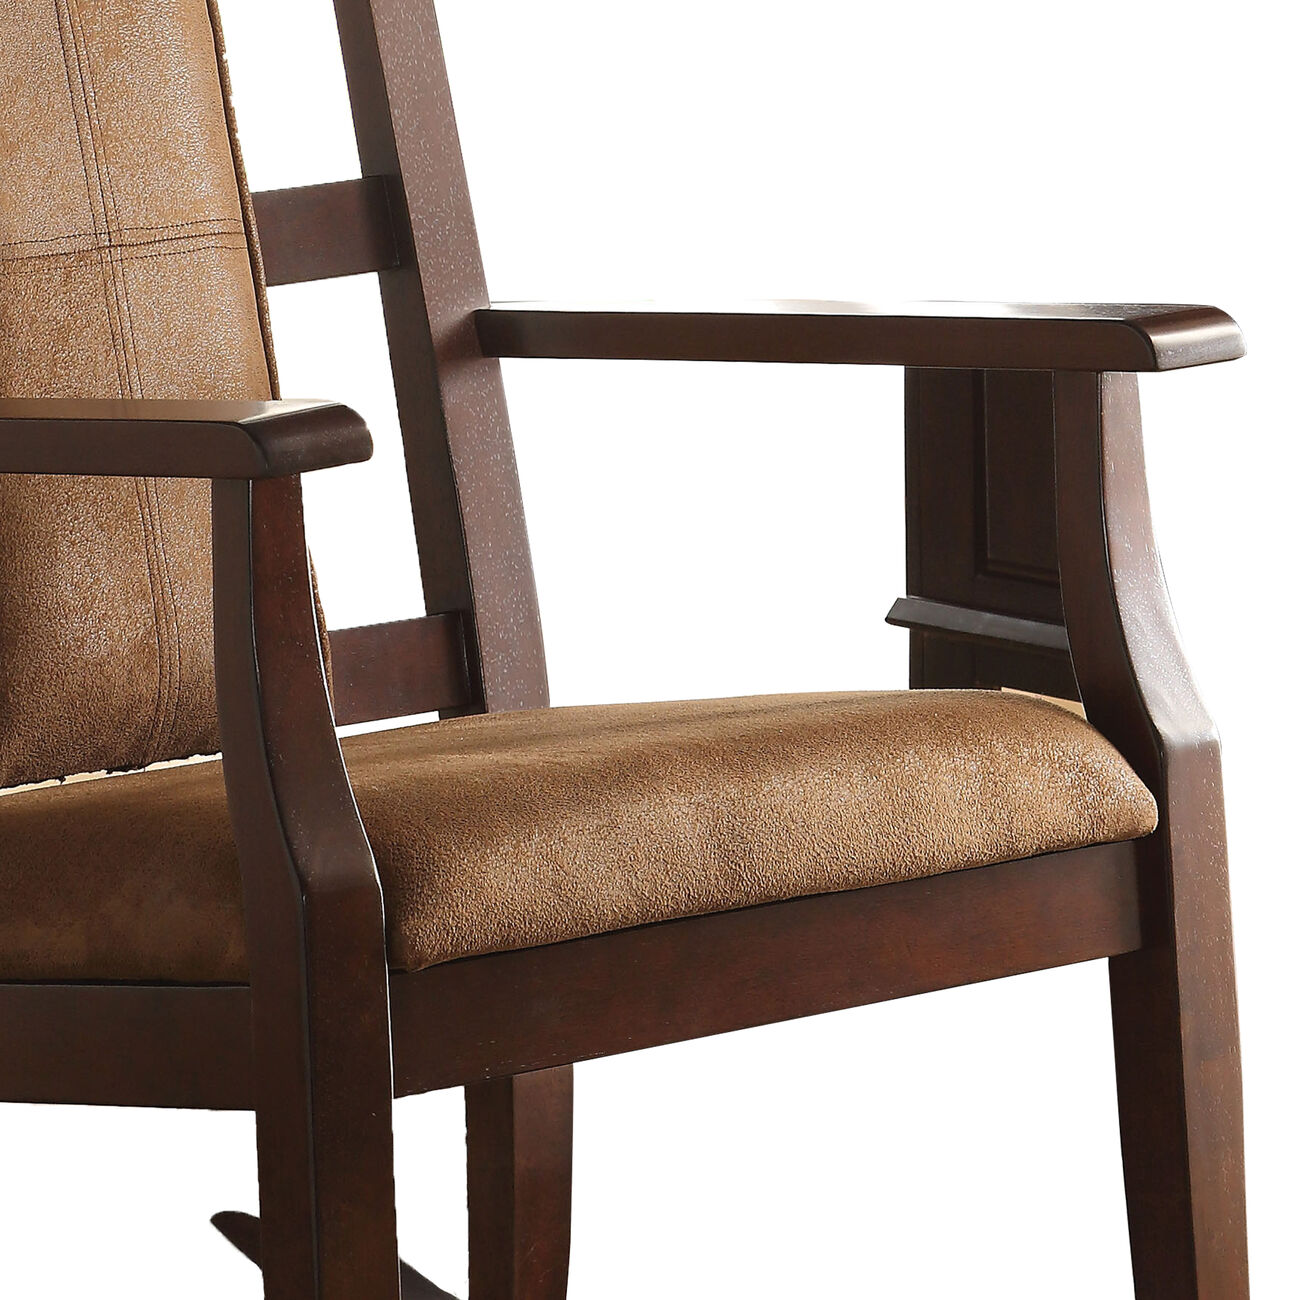 Butsea Wooden Rocking Chair, Brown